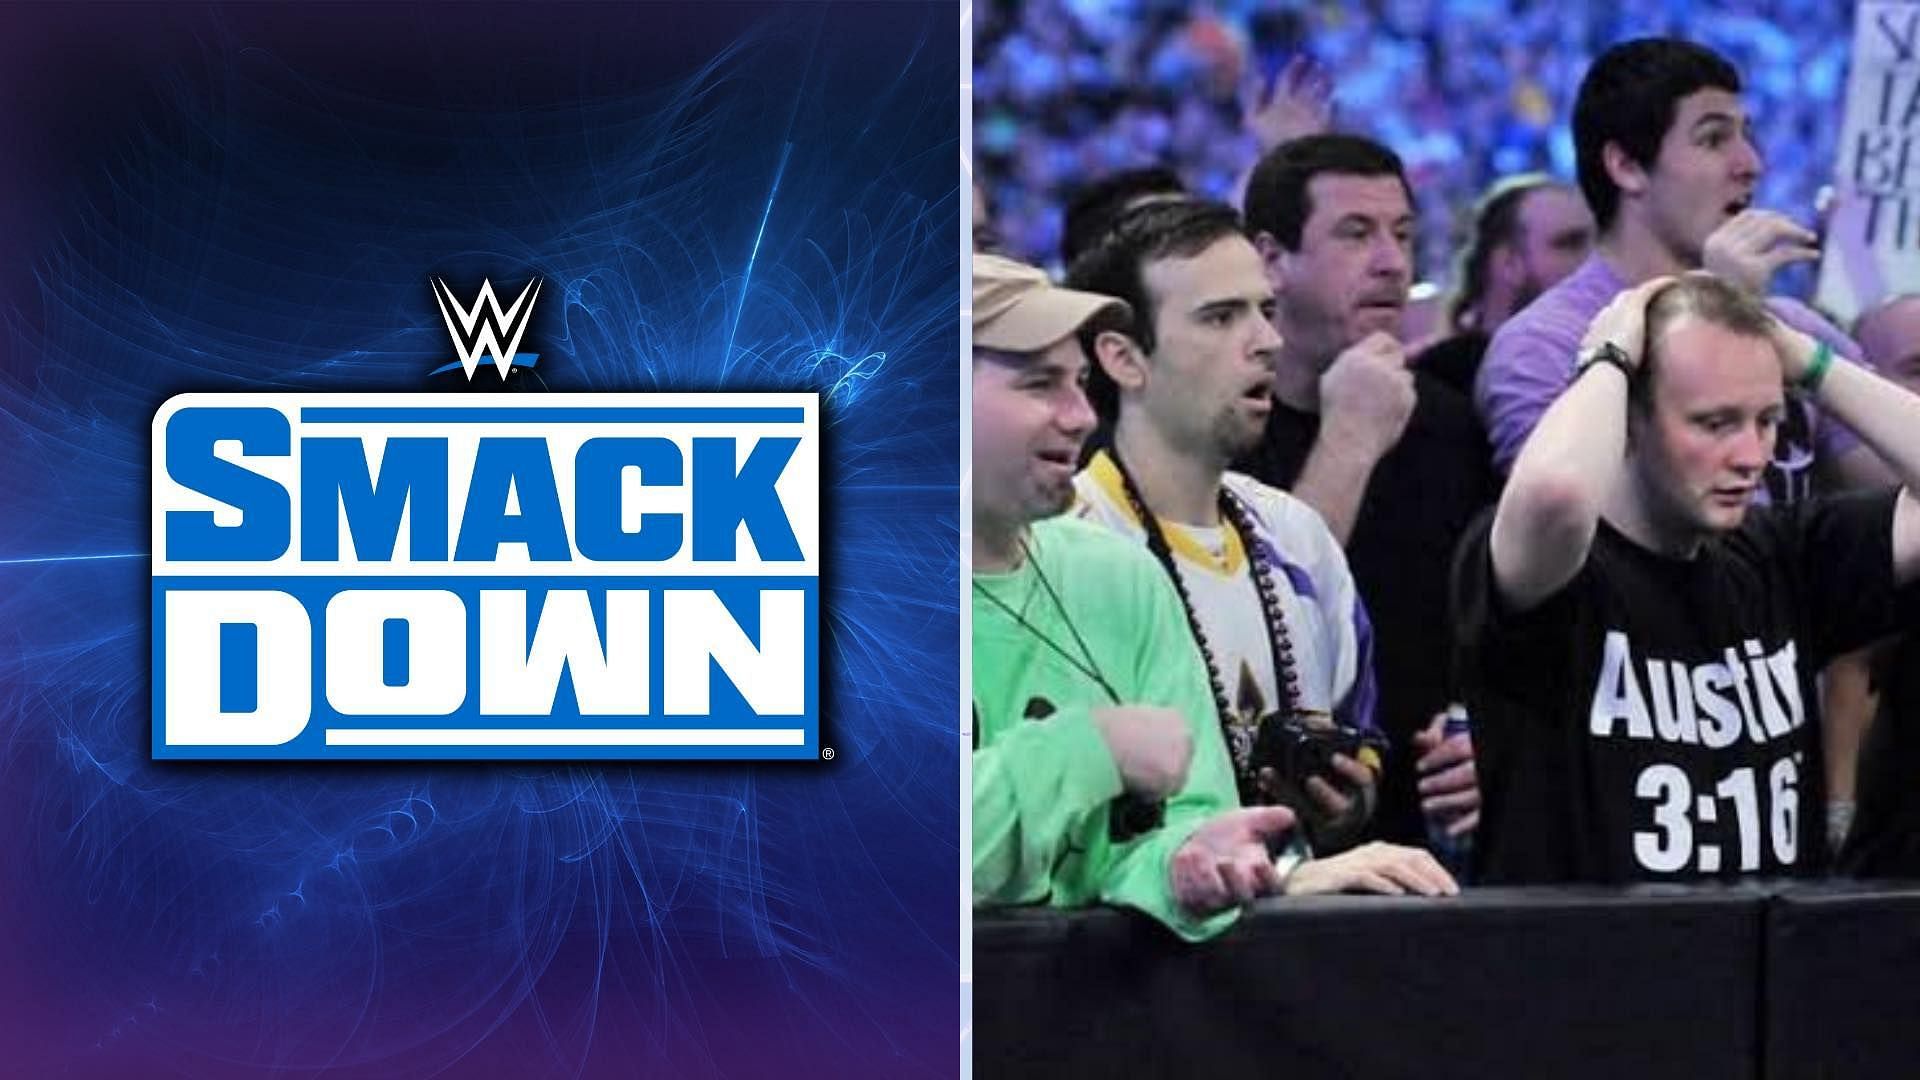 WWE SmackDown this week was live from BOK Center in Tulsa, Oklahoma